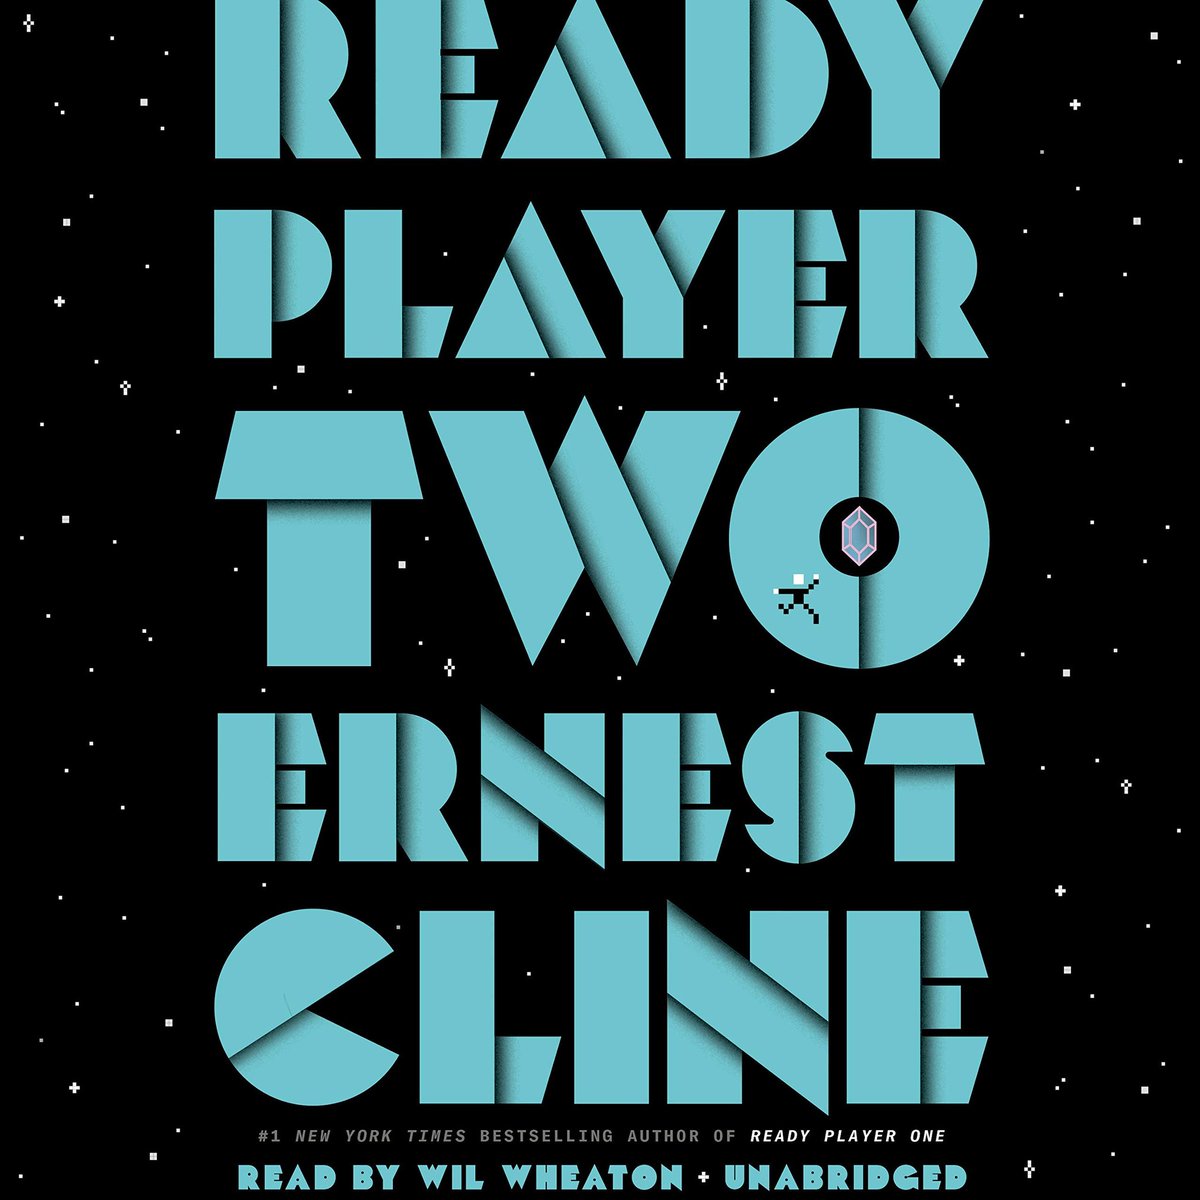 Just finished reading Ready Player Two. What to read next?

#books #BookTwitter #BookClub https://t.co/KzZ0dZ2M1S